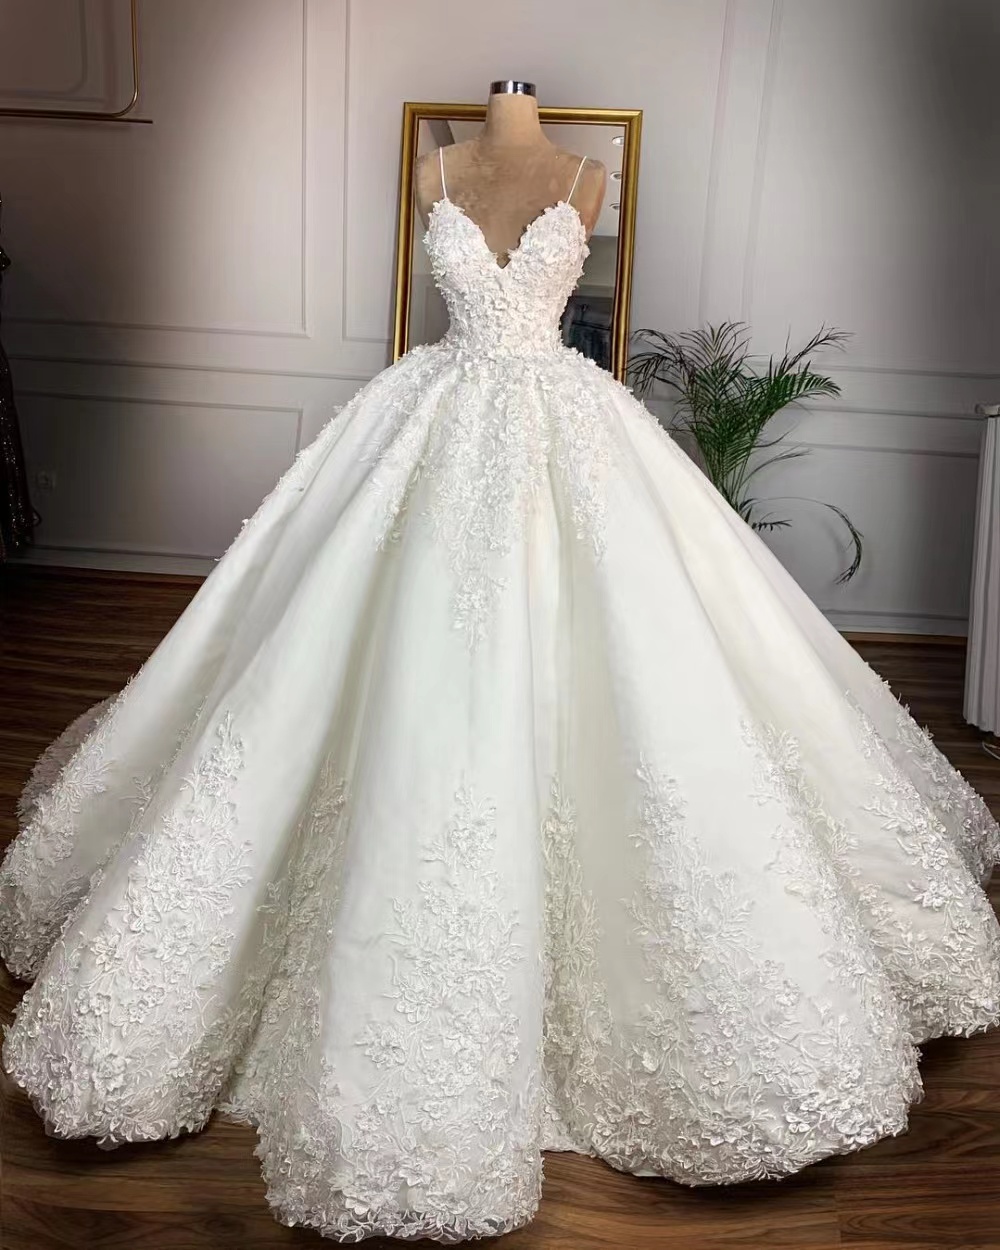 Make beautiful bridal dress by using our embroidery silk organza fabric